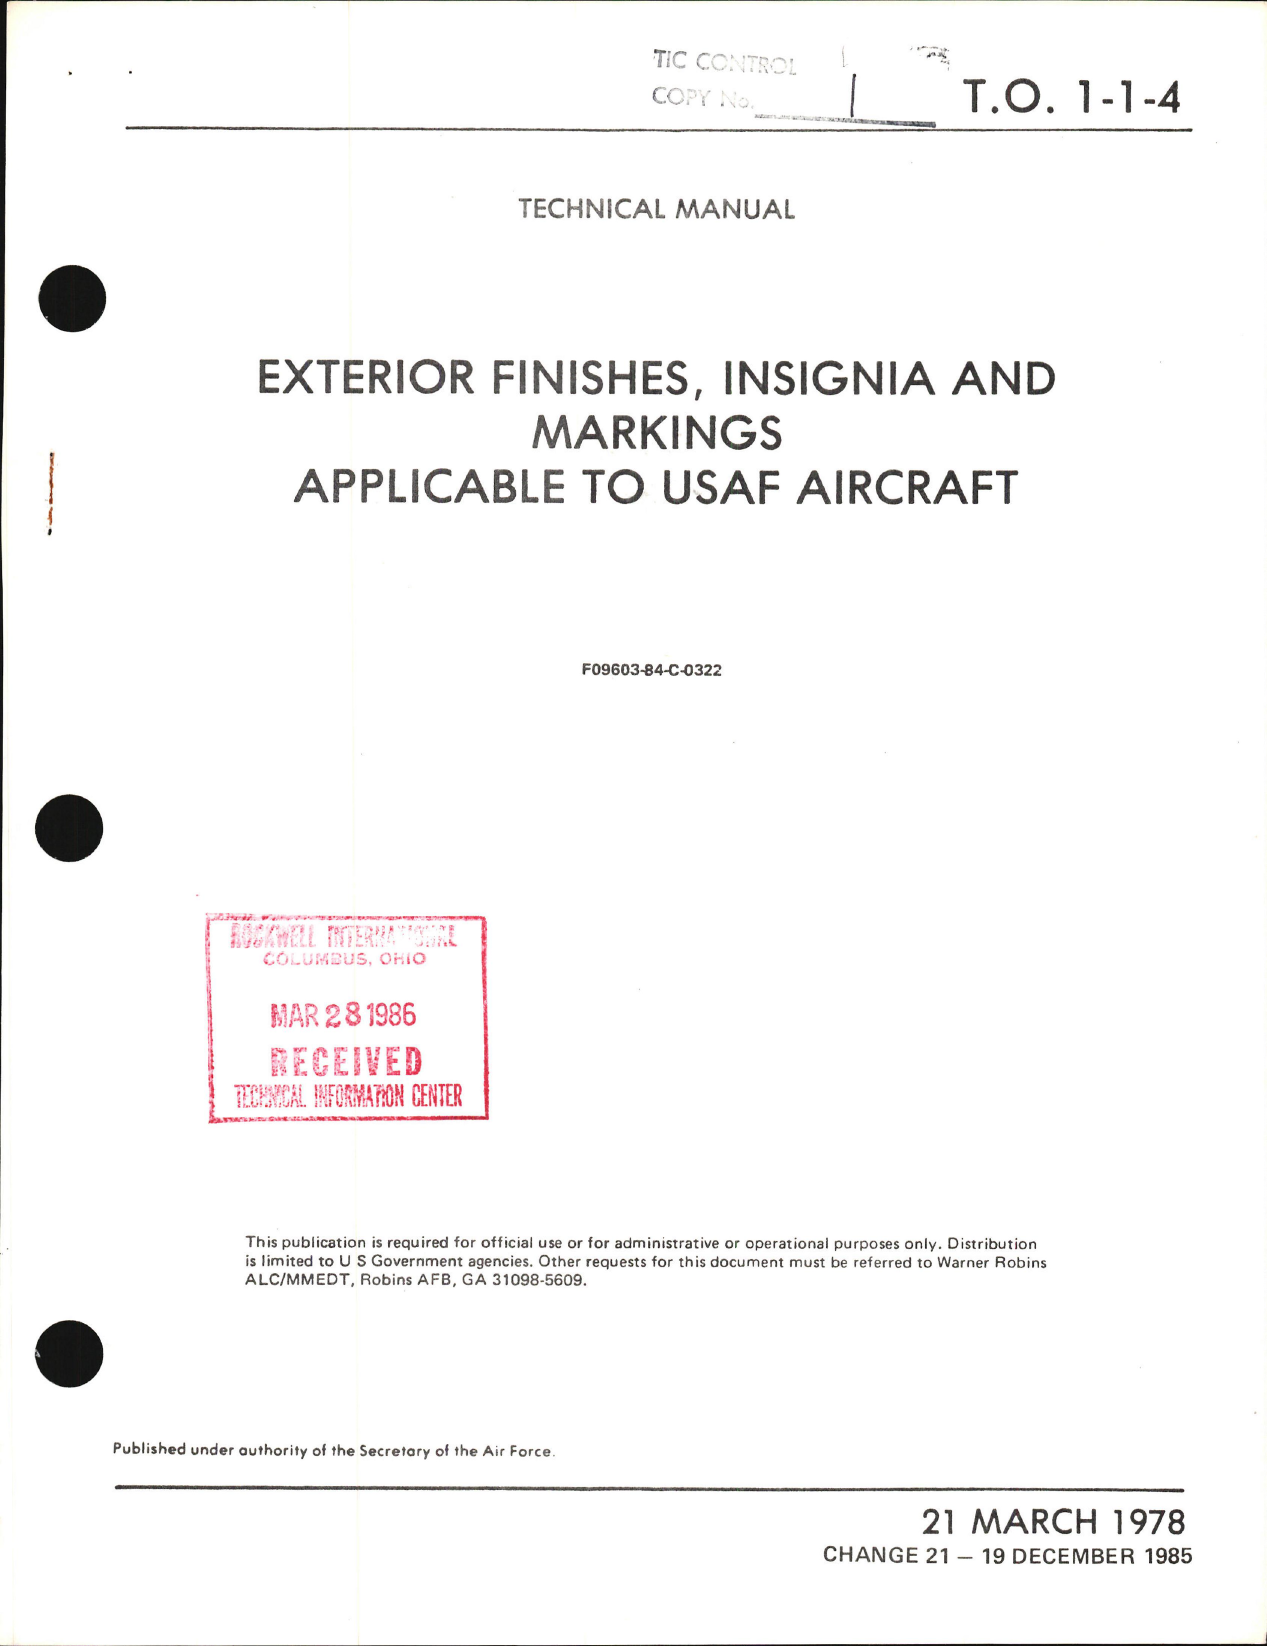 Sample page 1 from AirCorps Library document: Exterior Finishes, Insignia and Markings for USAF Aircraft - Change - 21